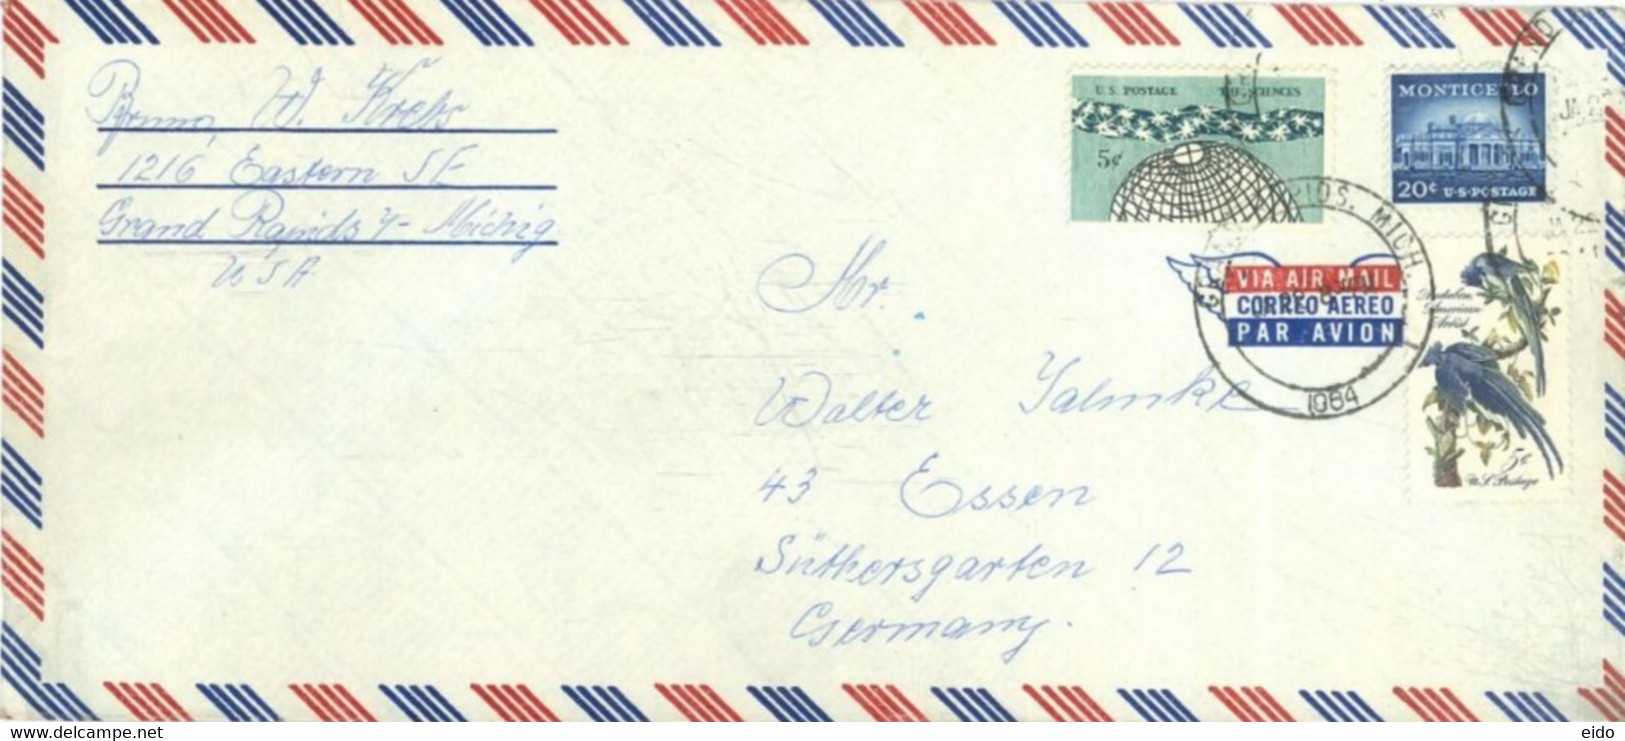 UNITED STATES - 1964 - STAMPS COVER TO GERMANY. - 1961-80